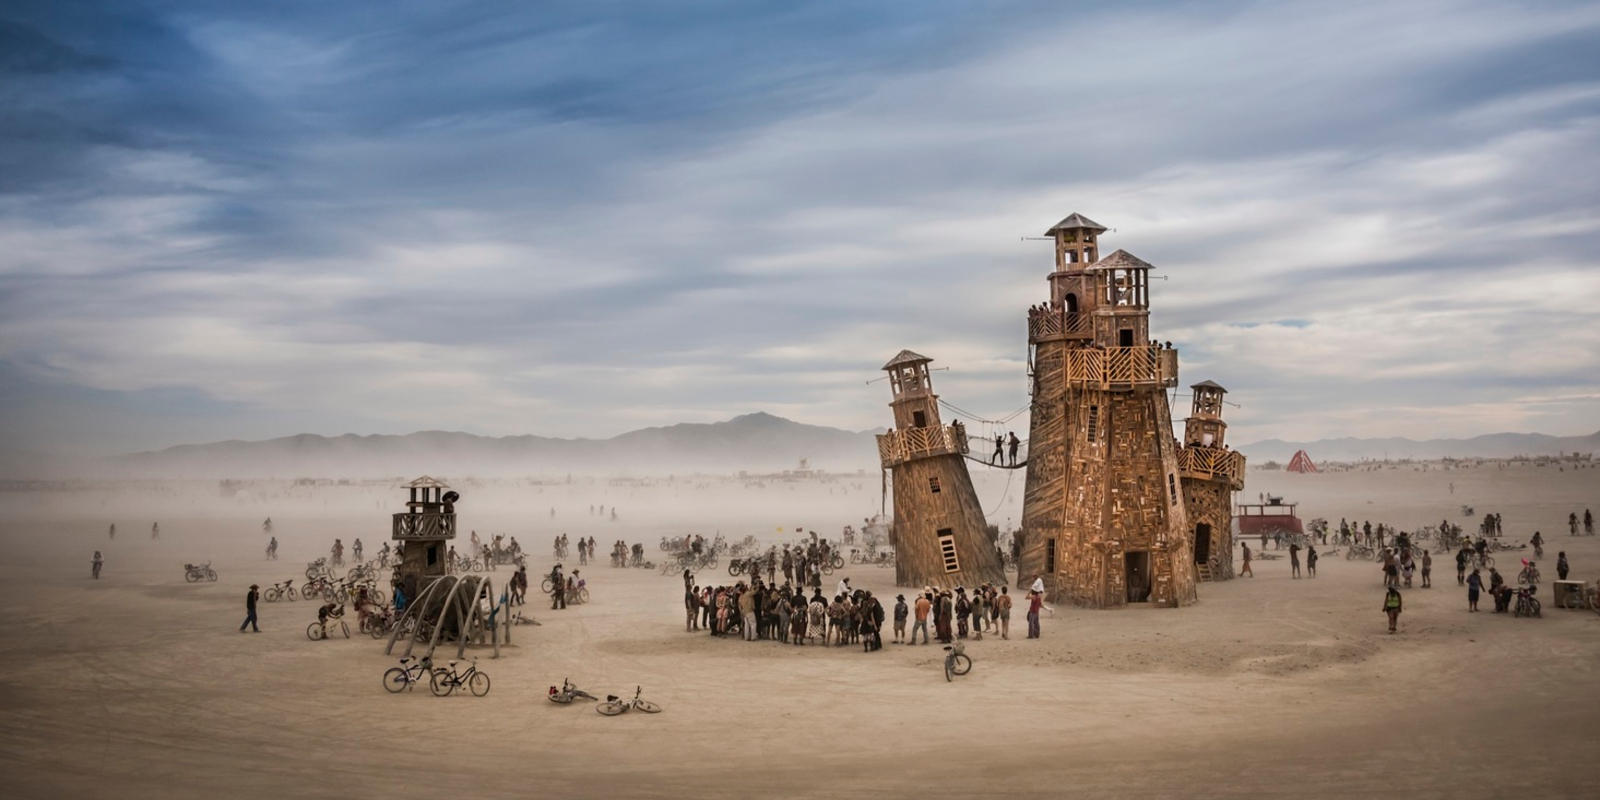 Burning Man: Moving from a For-Profit to a Nonprofit, the Ultimate Act of Gifting